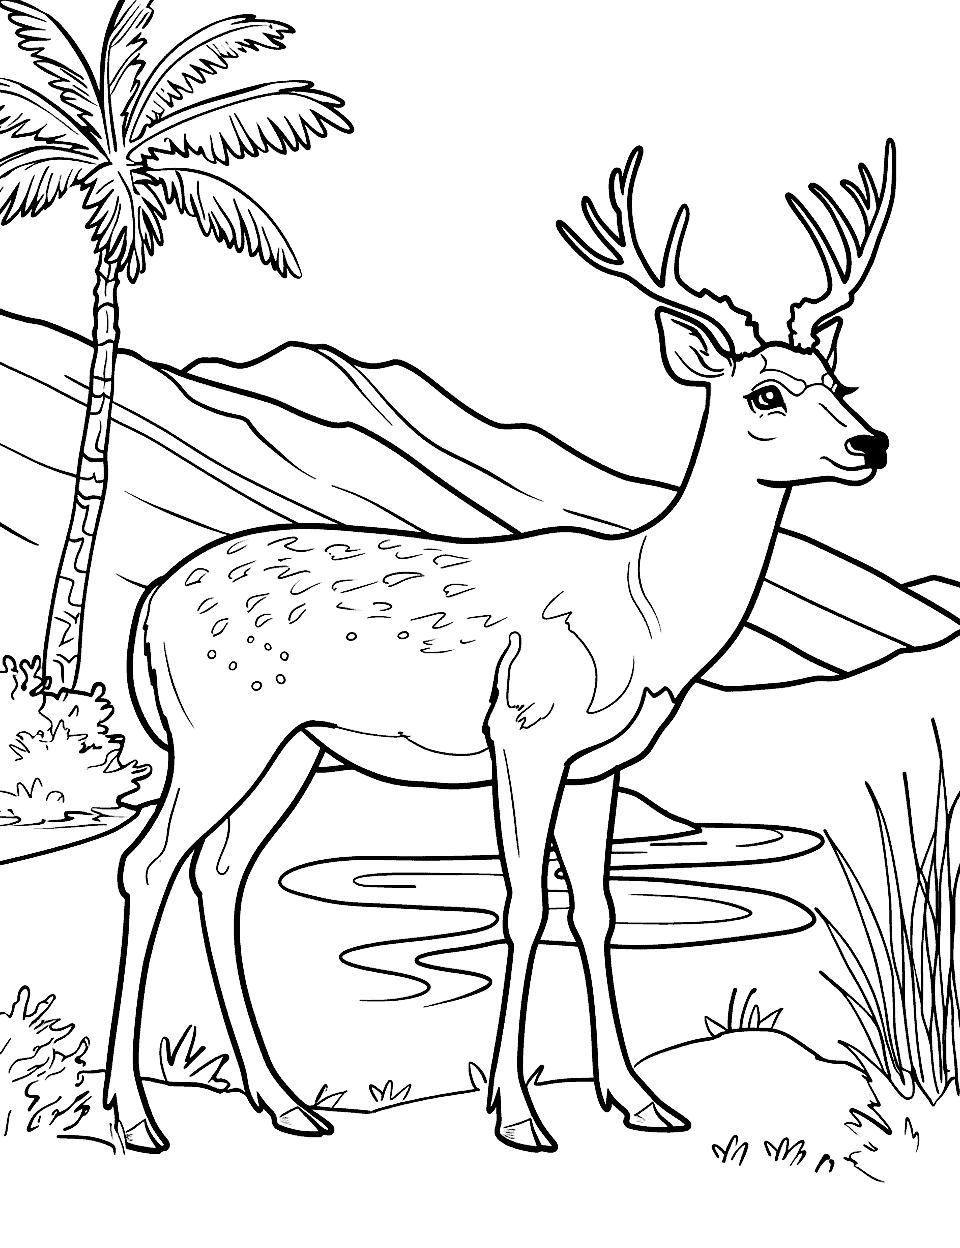 Deer in a Desert Oasis Coloring Page - A deer standing by a waterhole in the desert, with palm trees in the background.